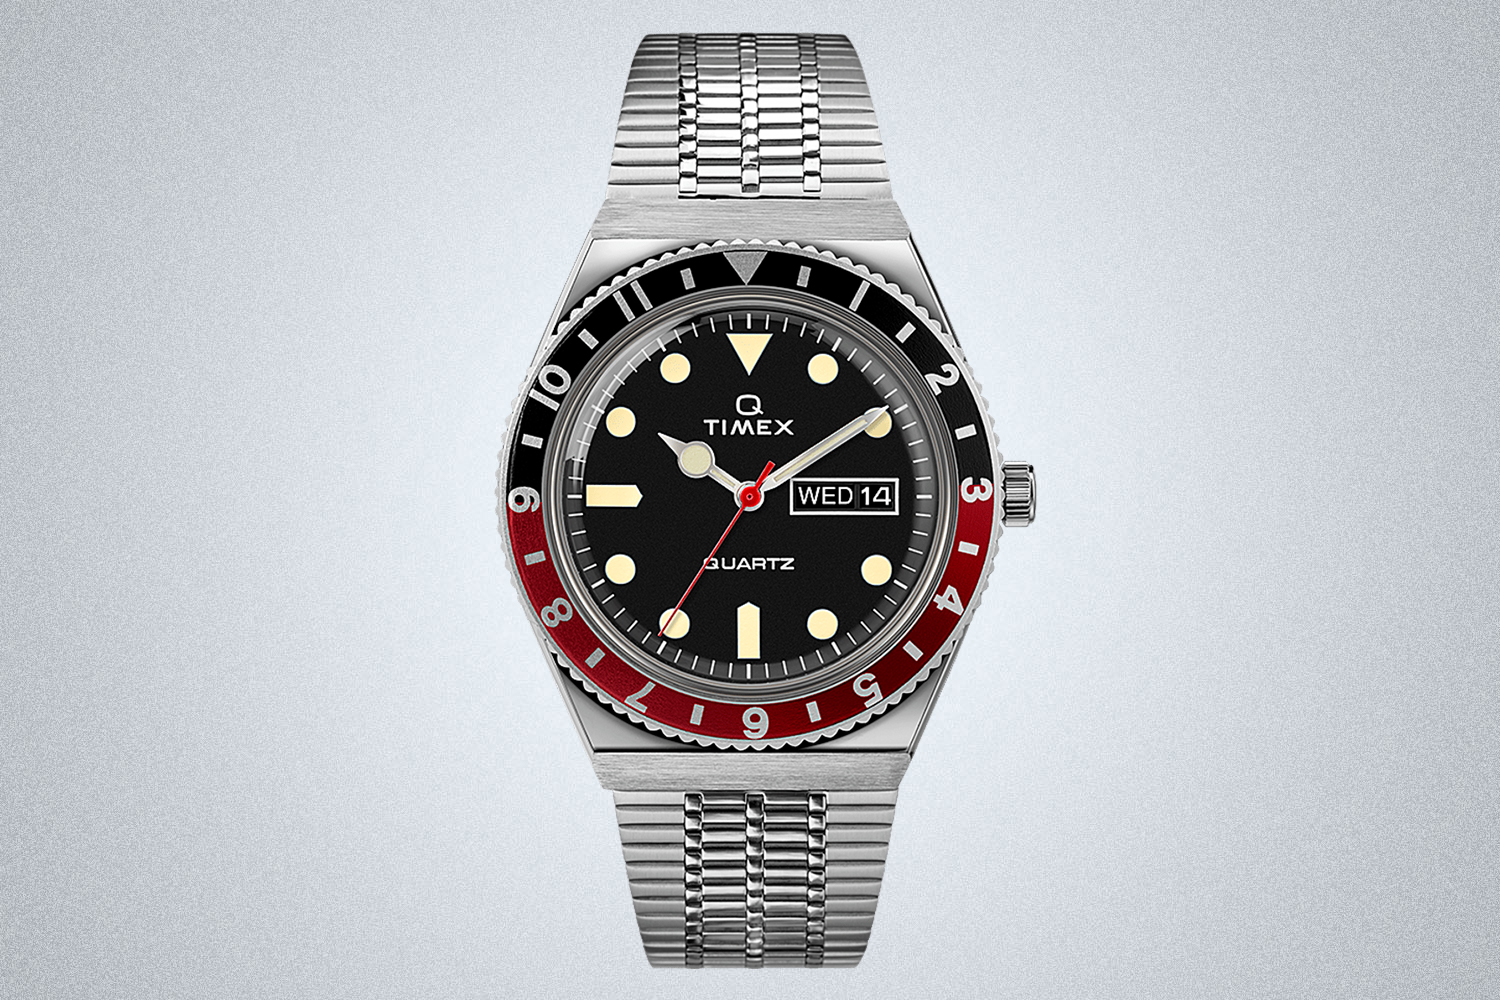 A Q Timex men's watch with a red and black bezel